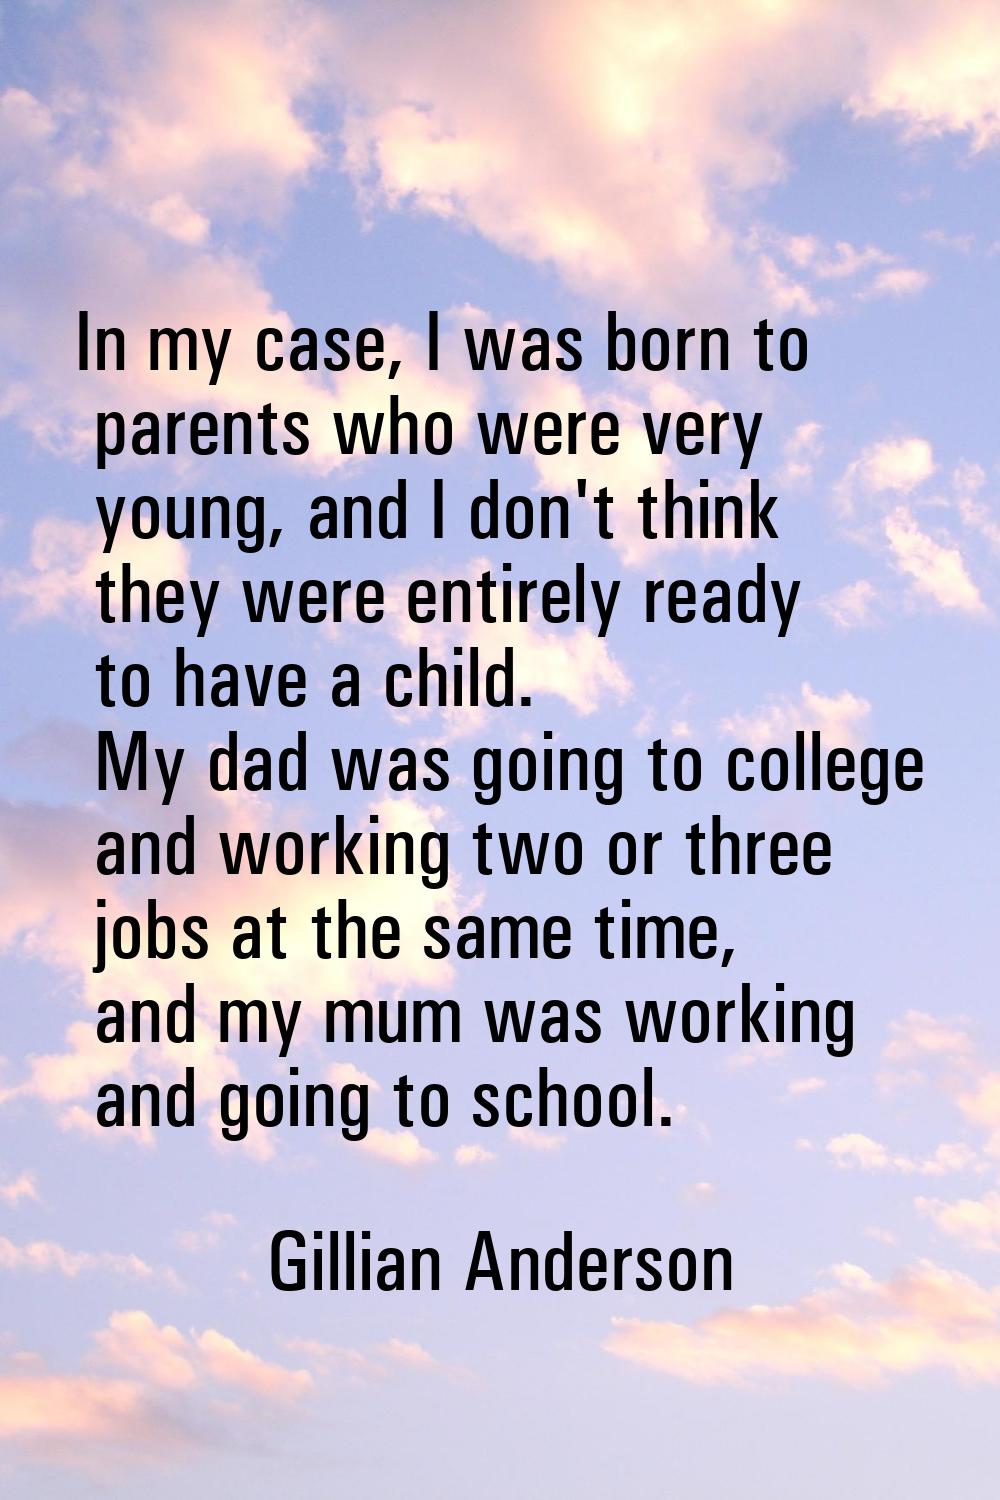 In my case, I was born to parents who were very young, and I don't think they were entirely ready t